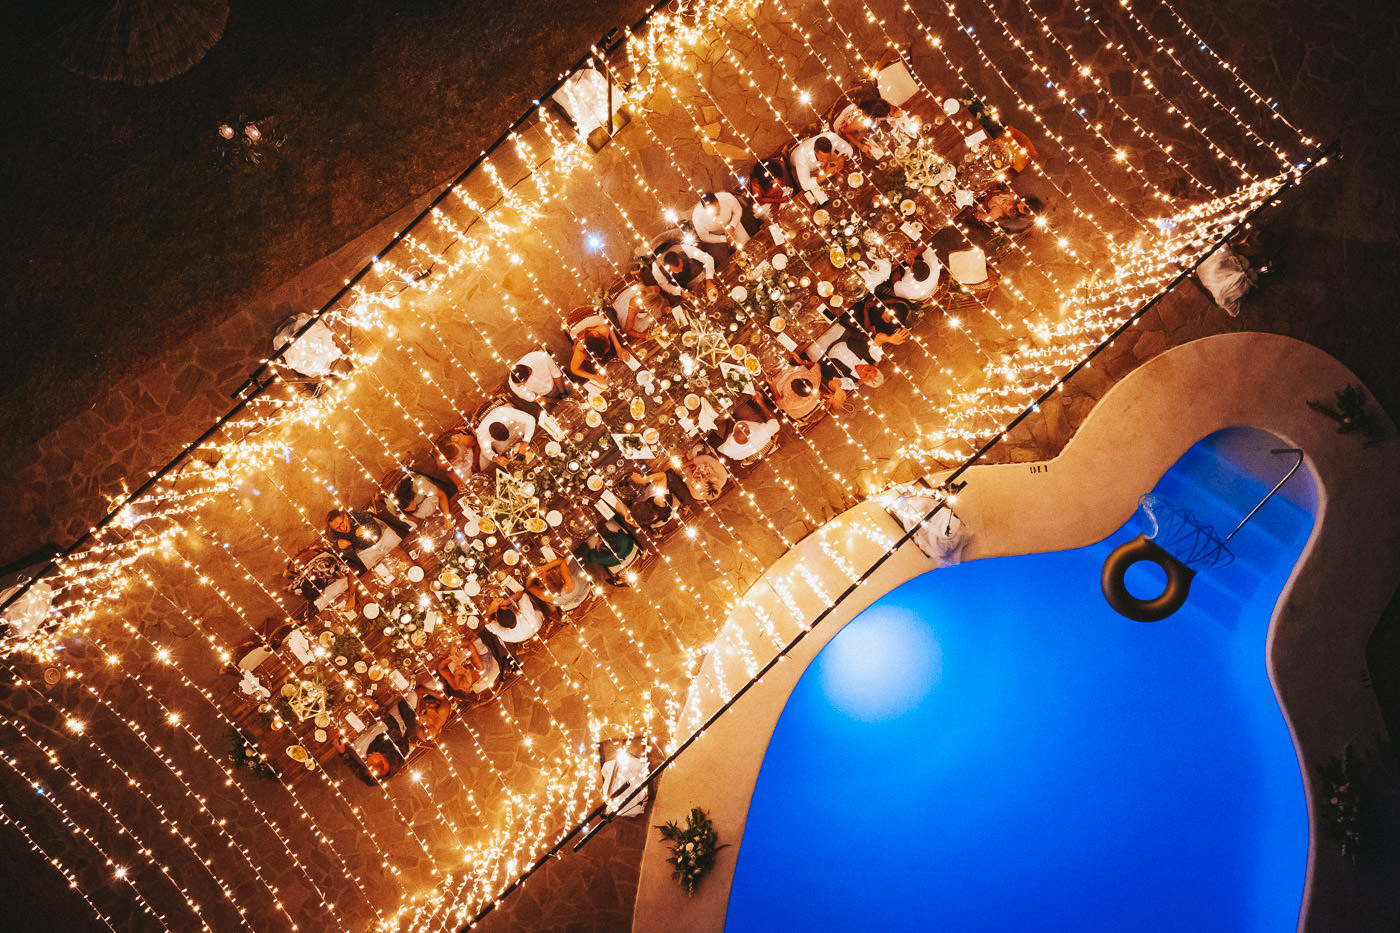 Drone footage of wedding ceremony by the pool under fairy lights, wedding location near Cabo de Gato, Andalusia, Spain - Wedding photographer Andalusia, Brautrausch